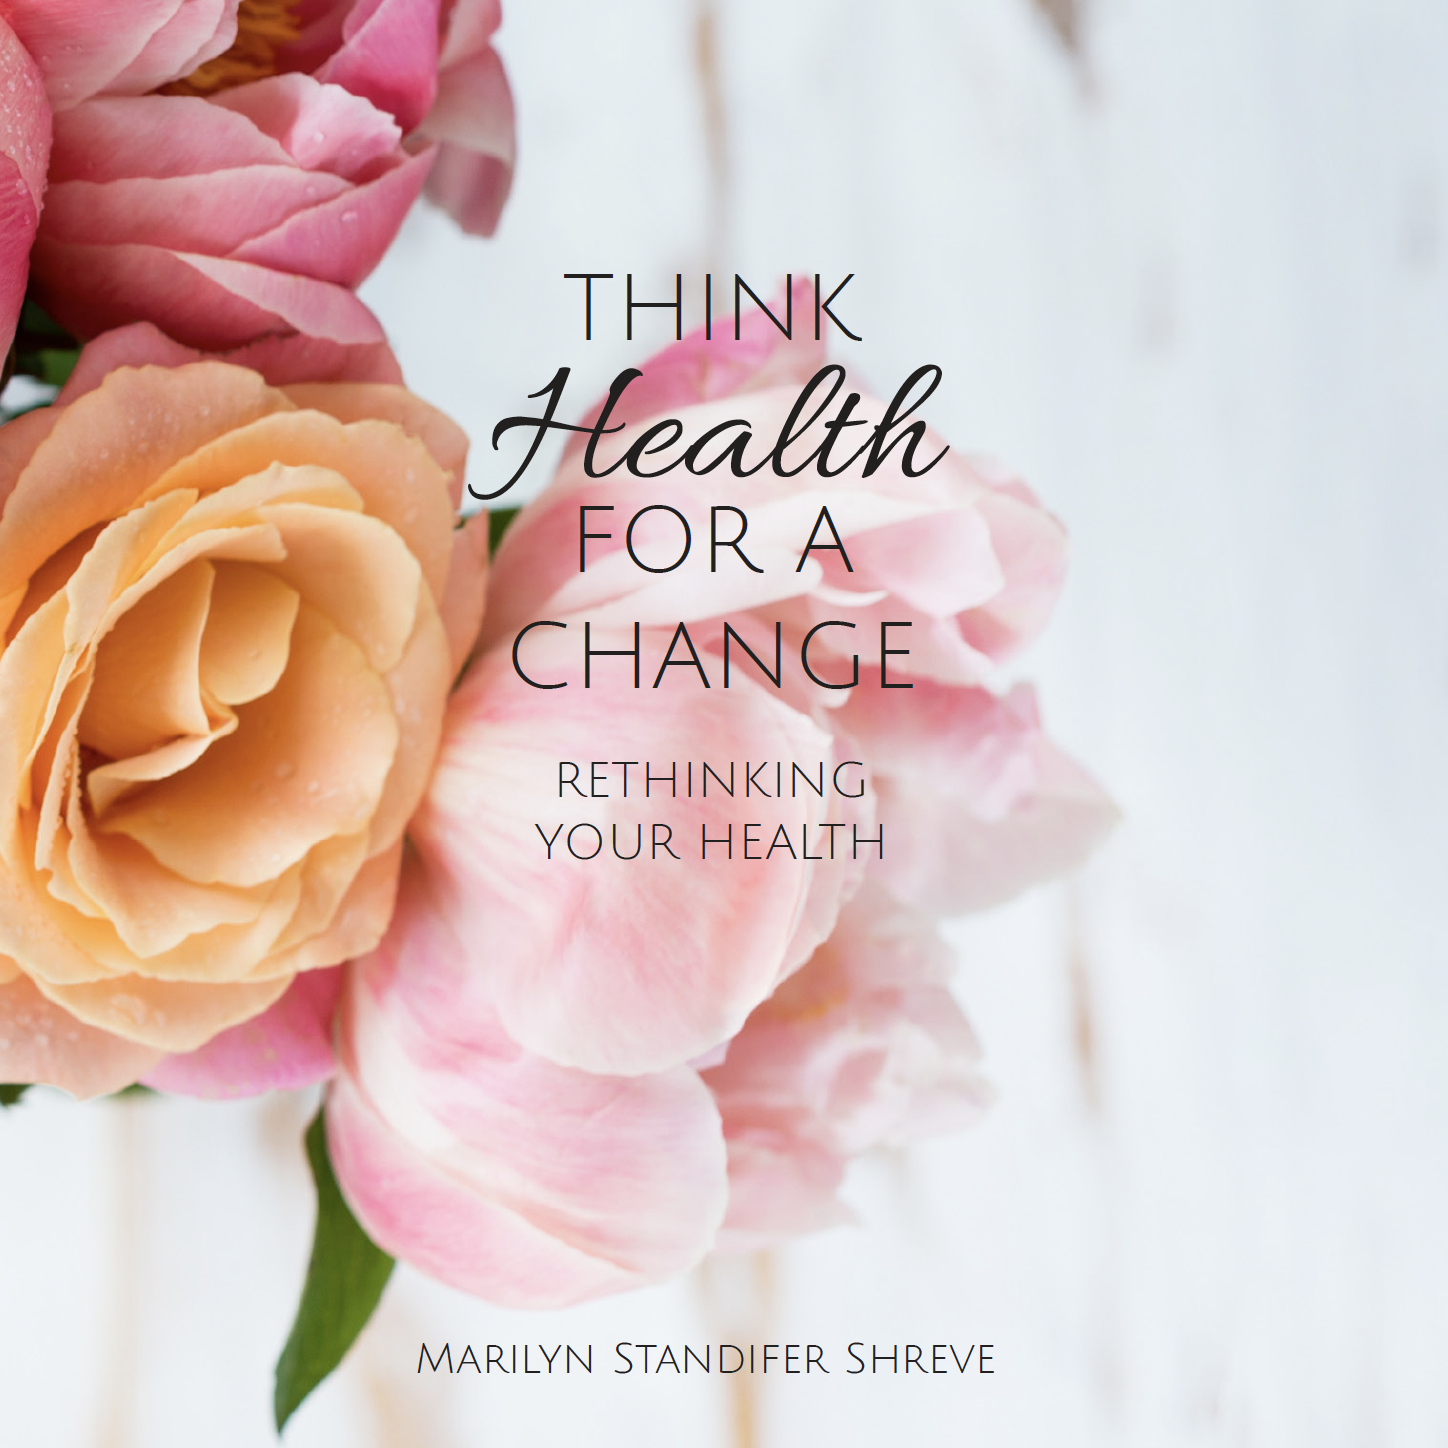 Think Health For A Change book cover image